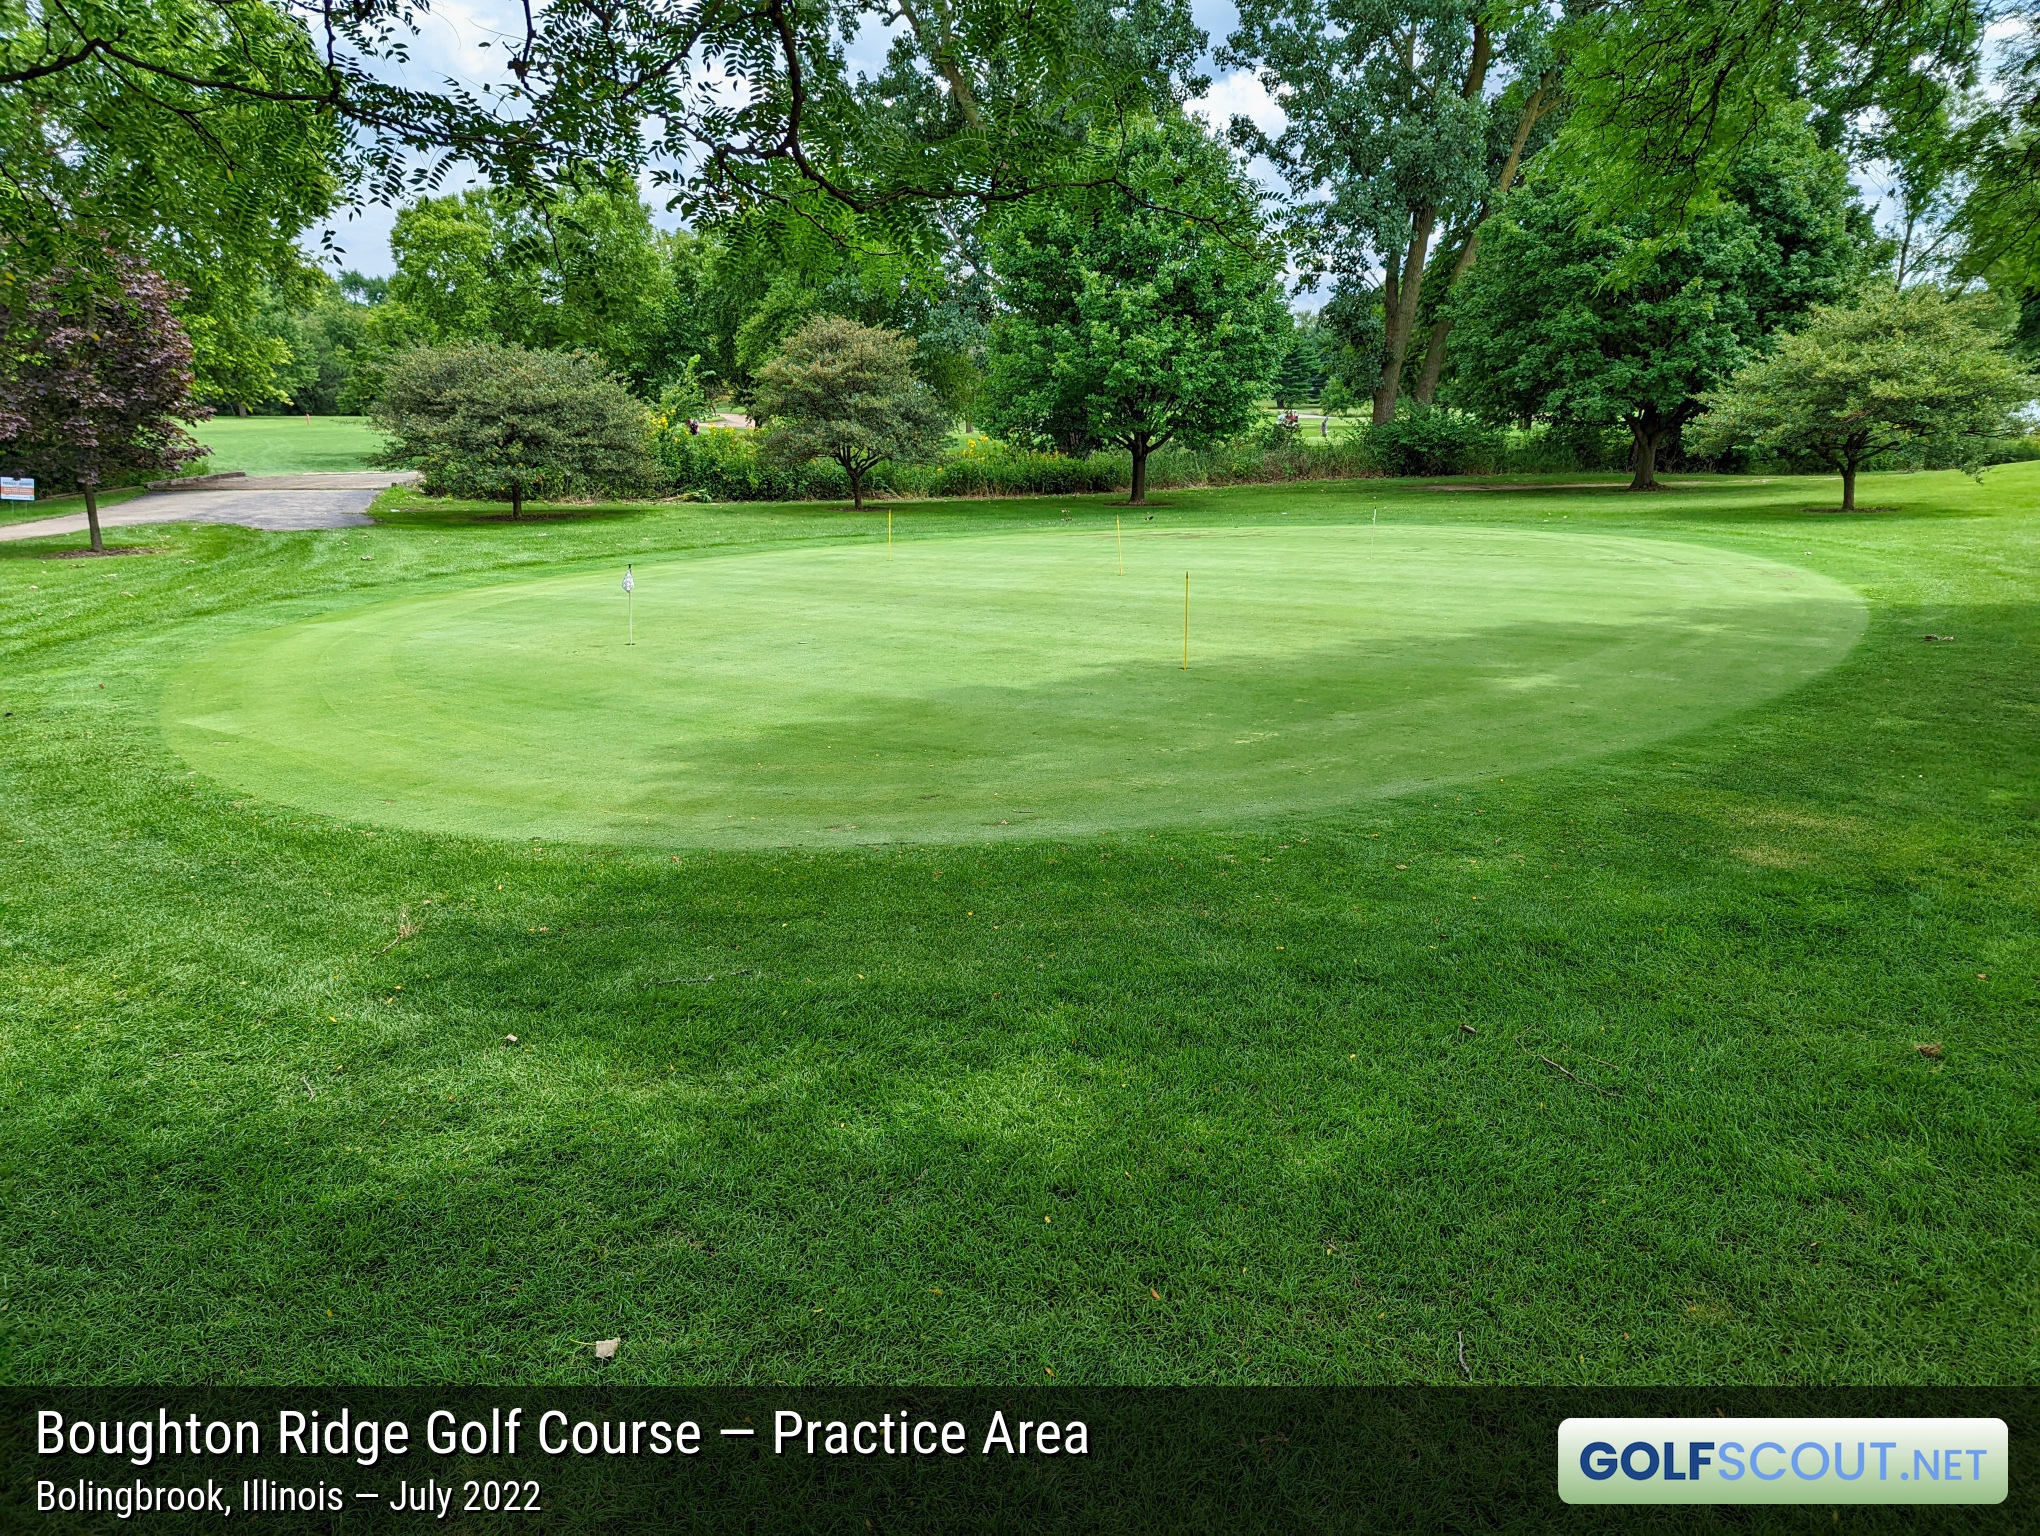 Photo of the practice area at Boughton Ridge Golf Course in Bolingbrook, Illinois. 